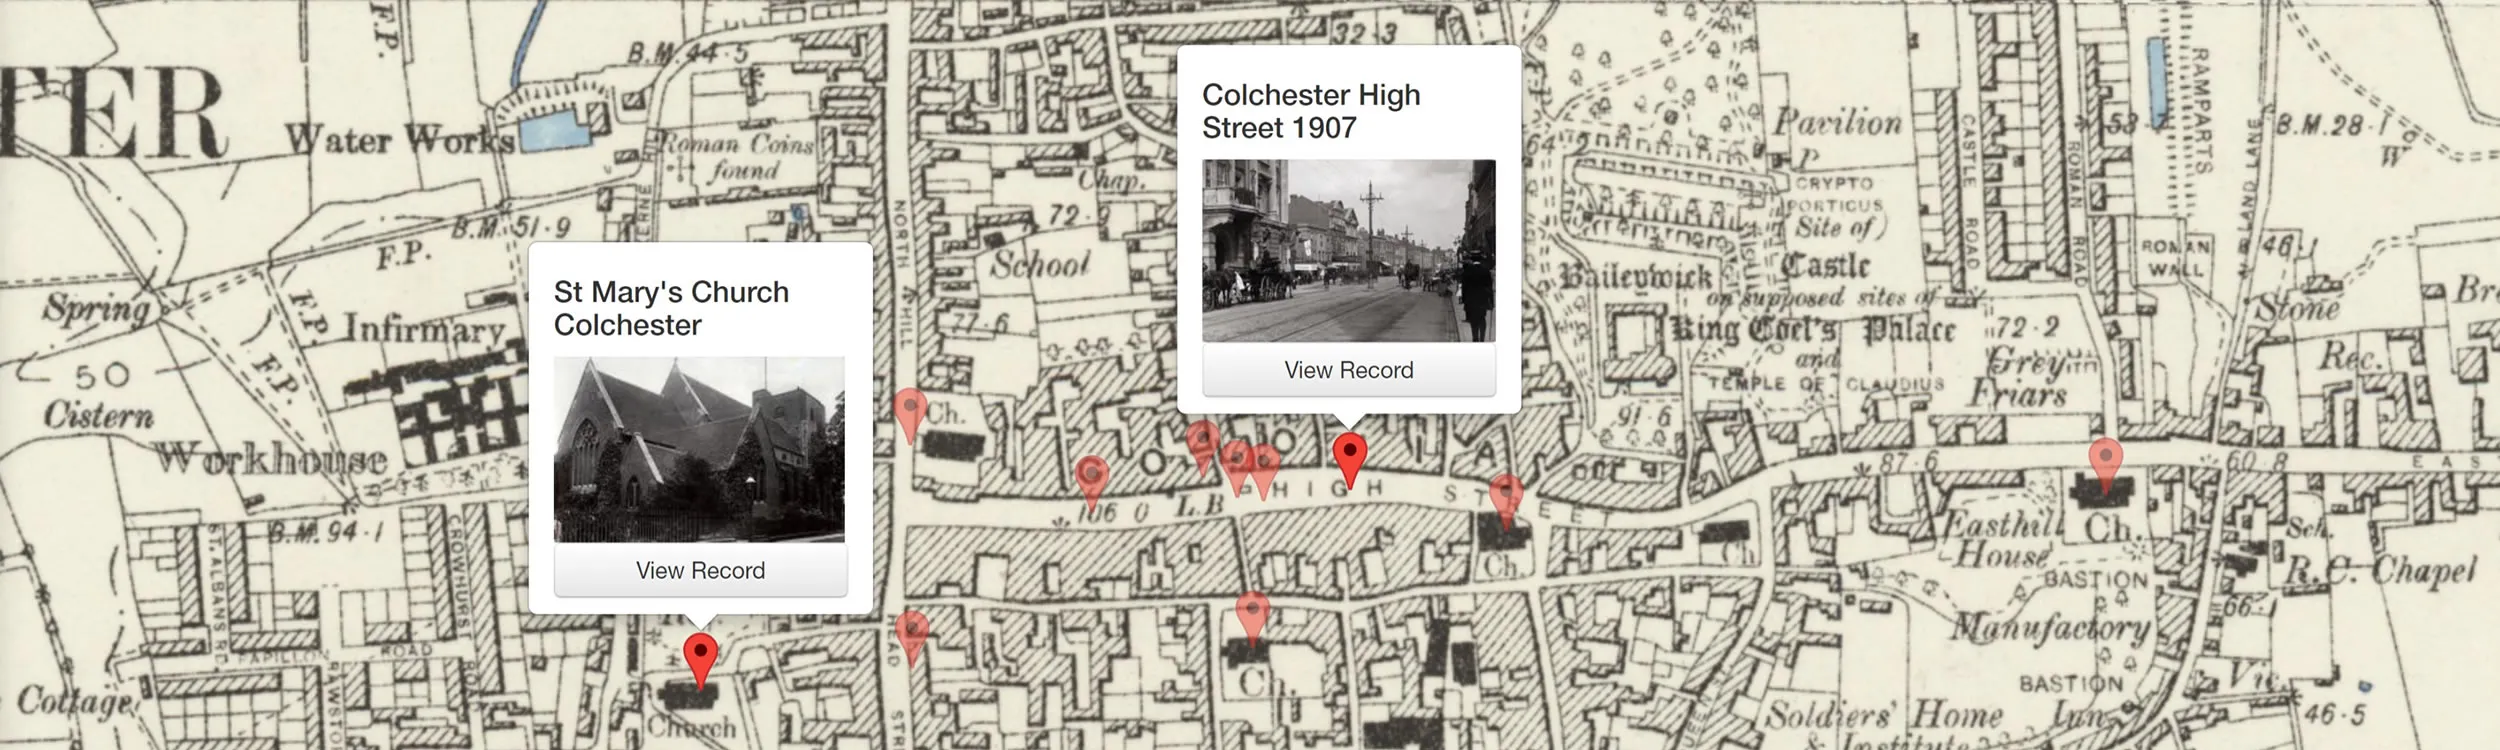 View your ancestor's home town as they would have seen it, using the Image Archive on Map Explorer™